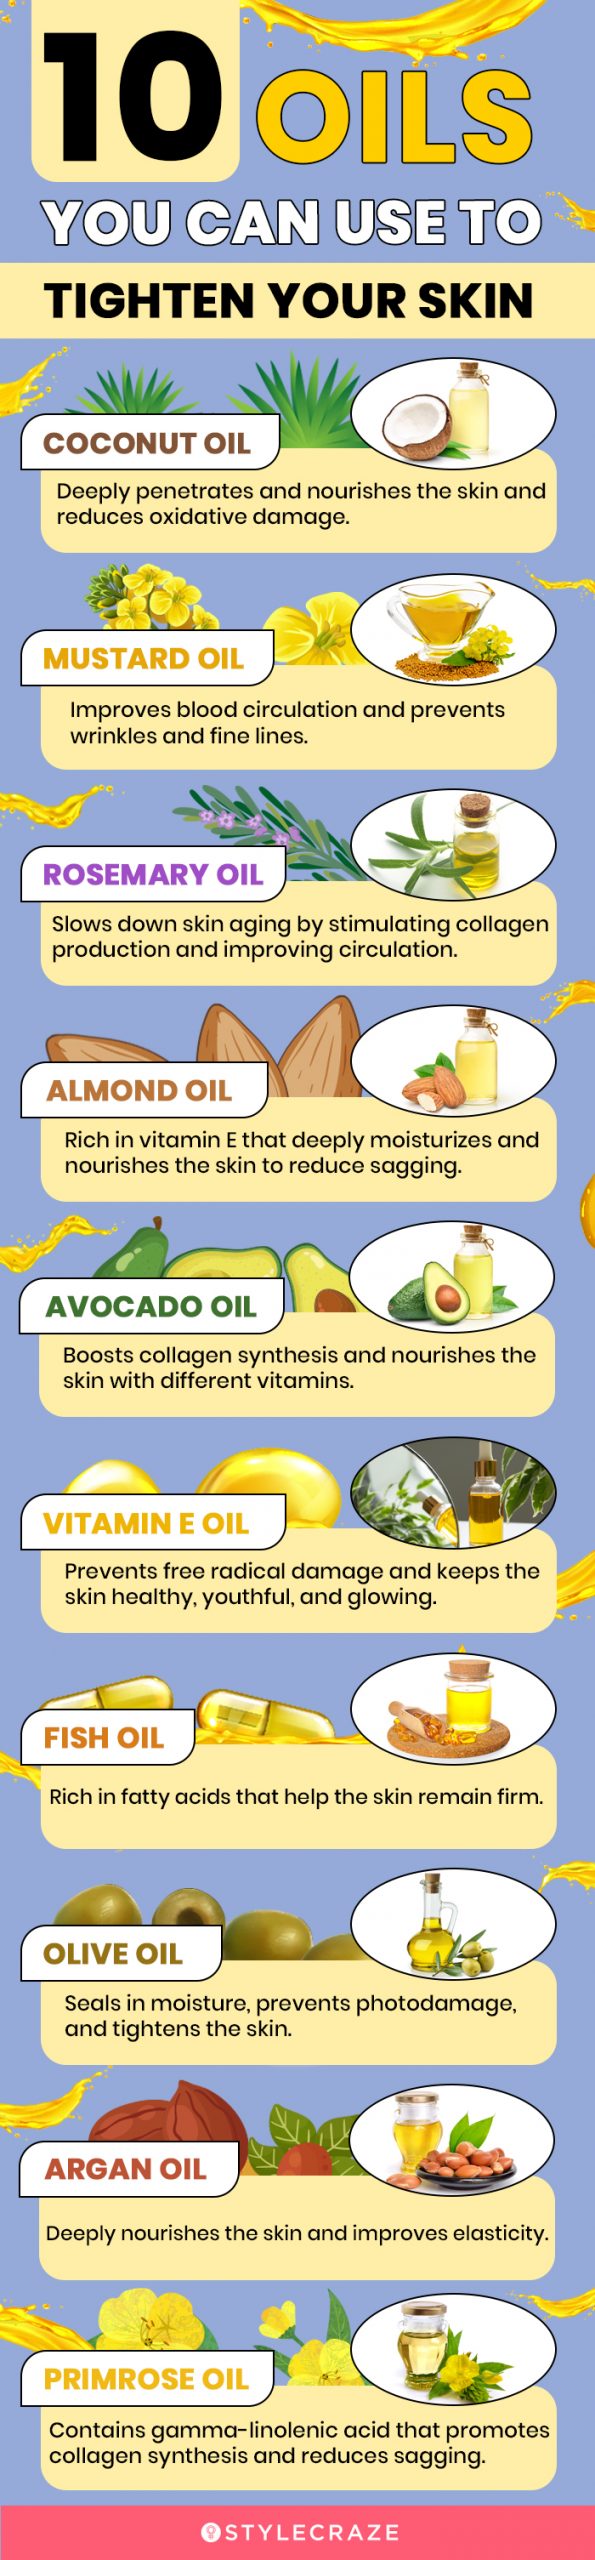 10 oils you can use to tighten your skin (infographic)